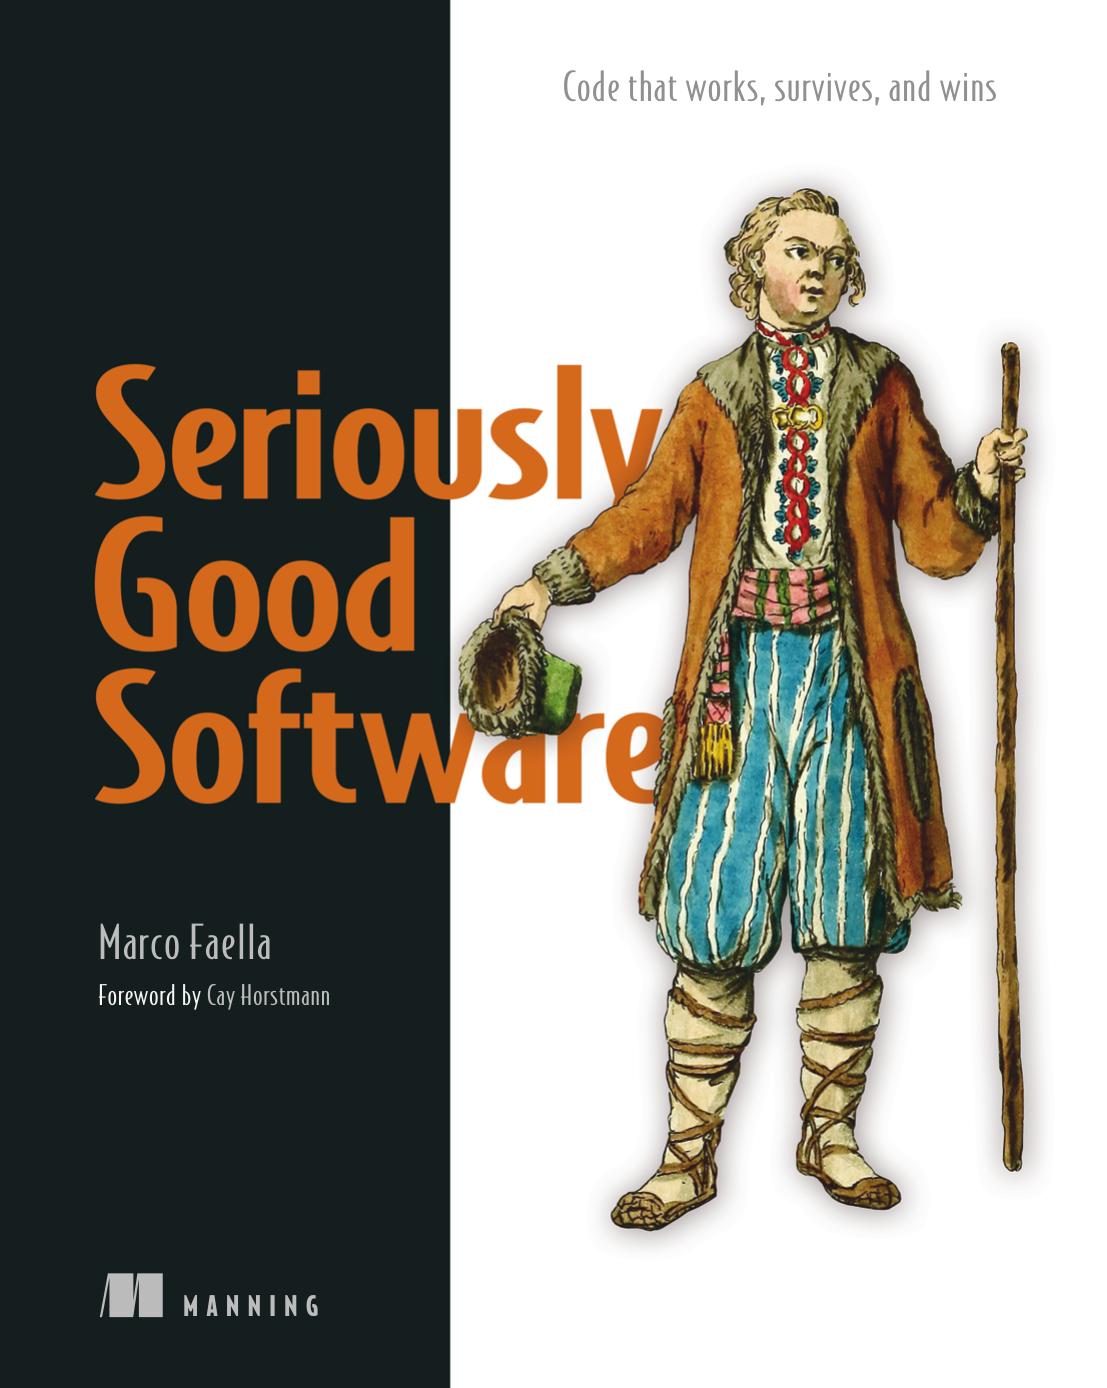 Seriously Good Software: Code that works, survives, and wins by Marco Faella